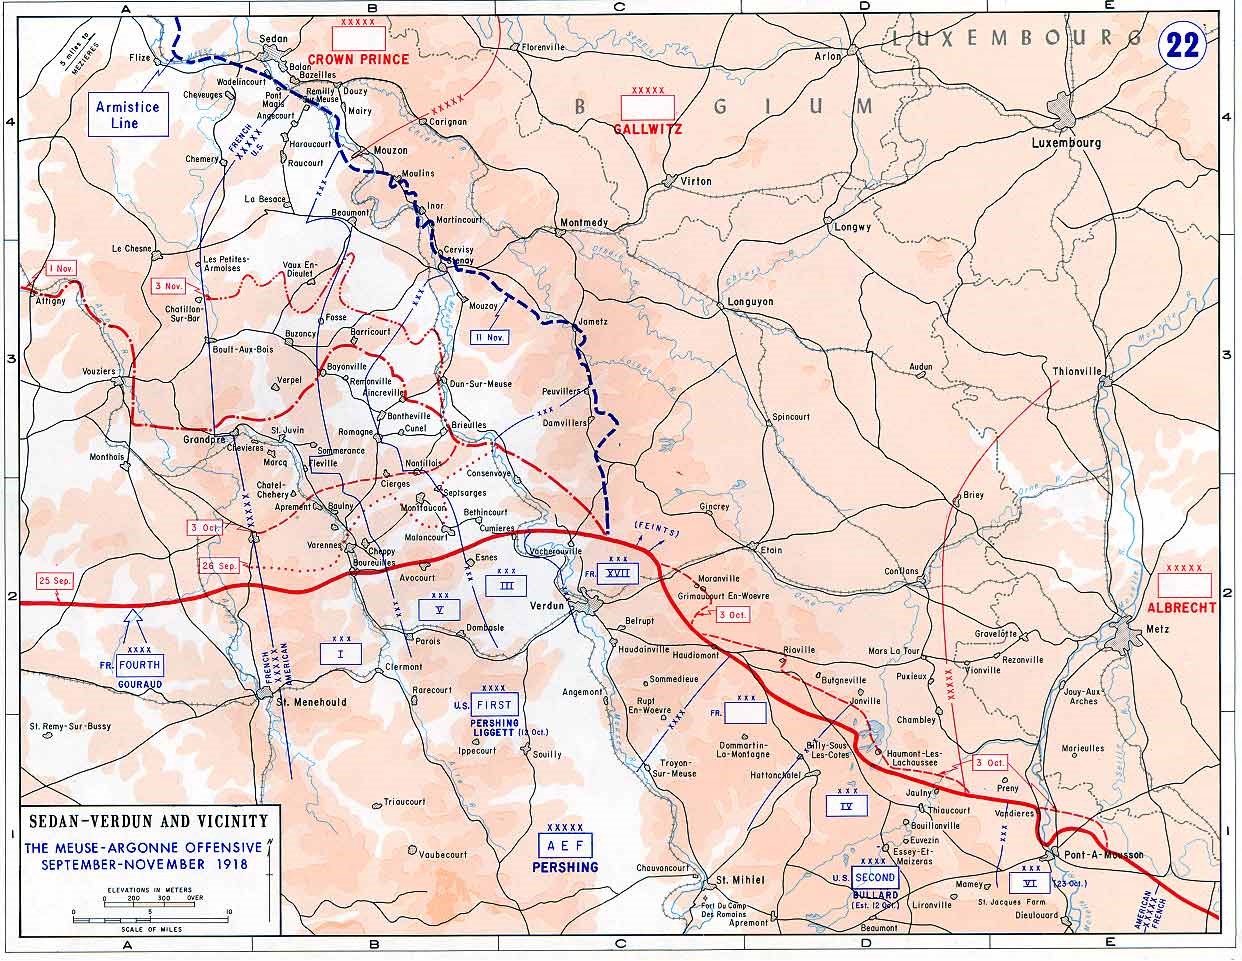 Map showing lines of battle depicted in blue or red